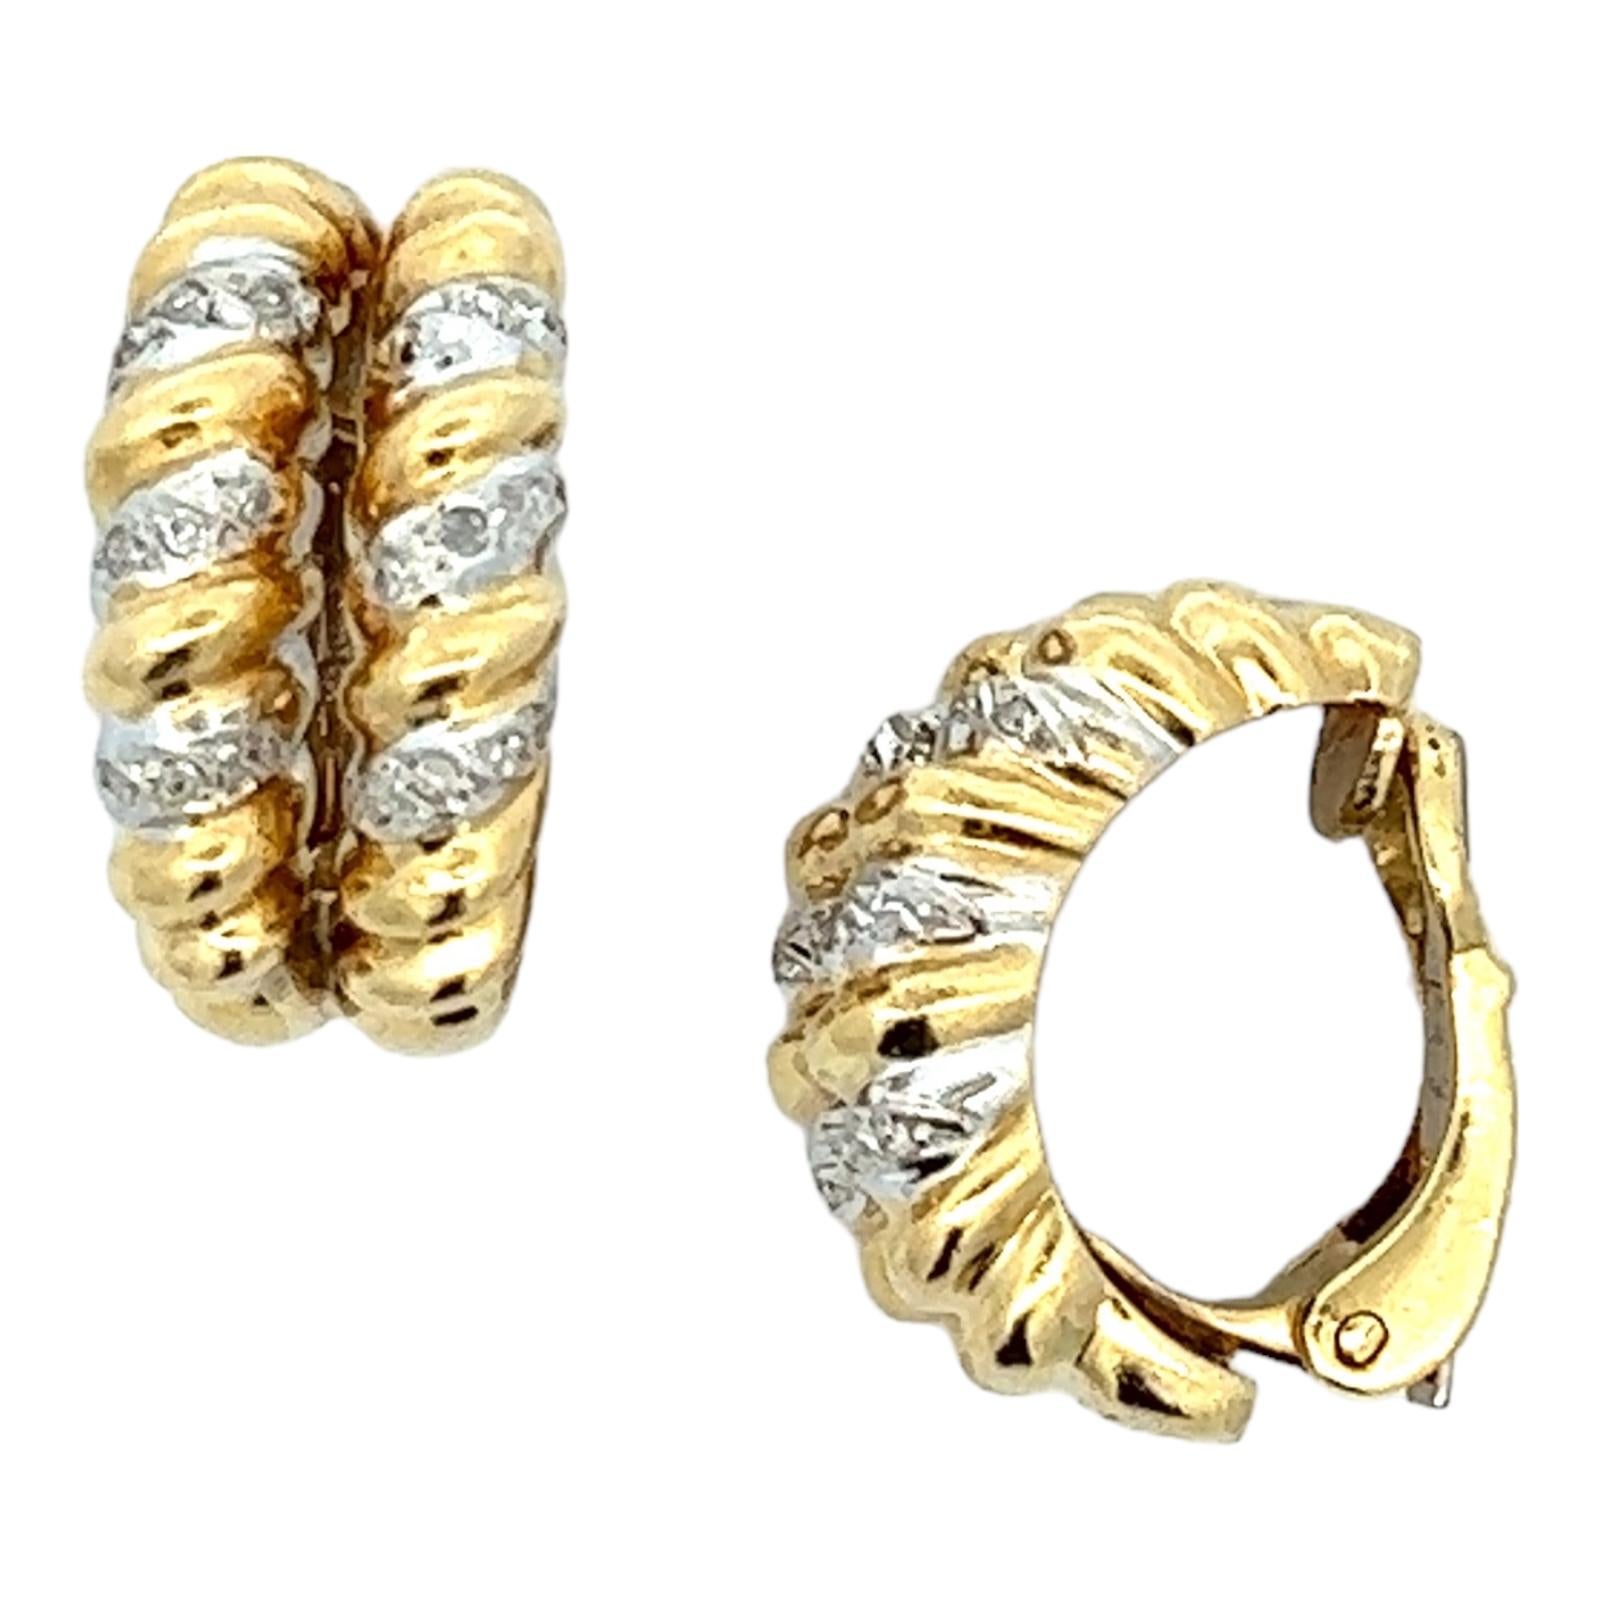 Two row round brilliant cut diamond earrings fashioned in 18 karat yellow gold spirals. The earrings feature 18 round brilliant cut diamonds weighing approximately .12 CTW and graded H-I color and SI clarity. The earrings measure.40 x .75 inches,